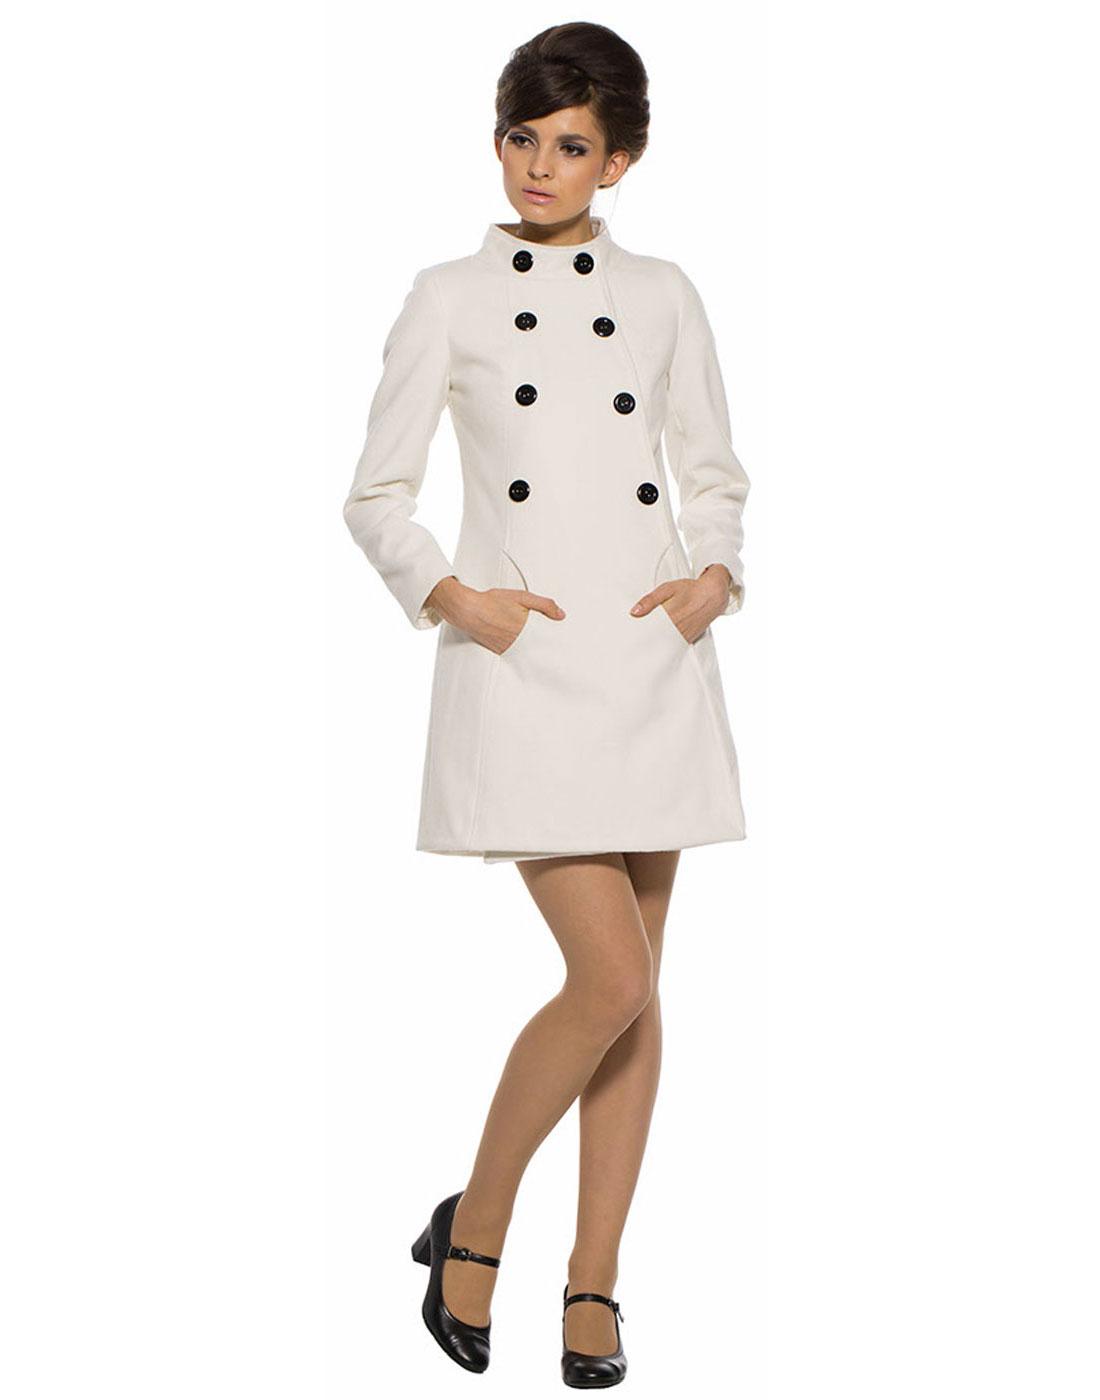 MARMALADE Mod Fitted Coat with Half Circle Pockets